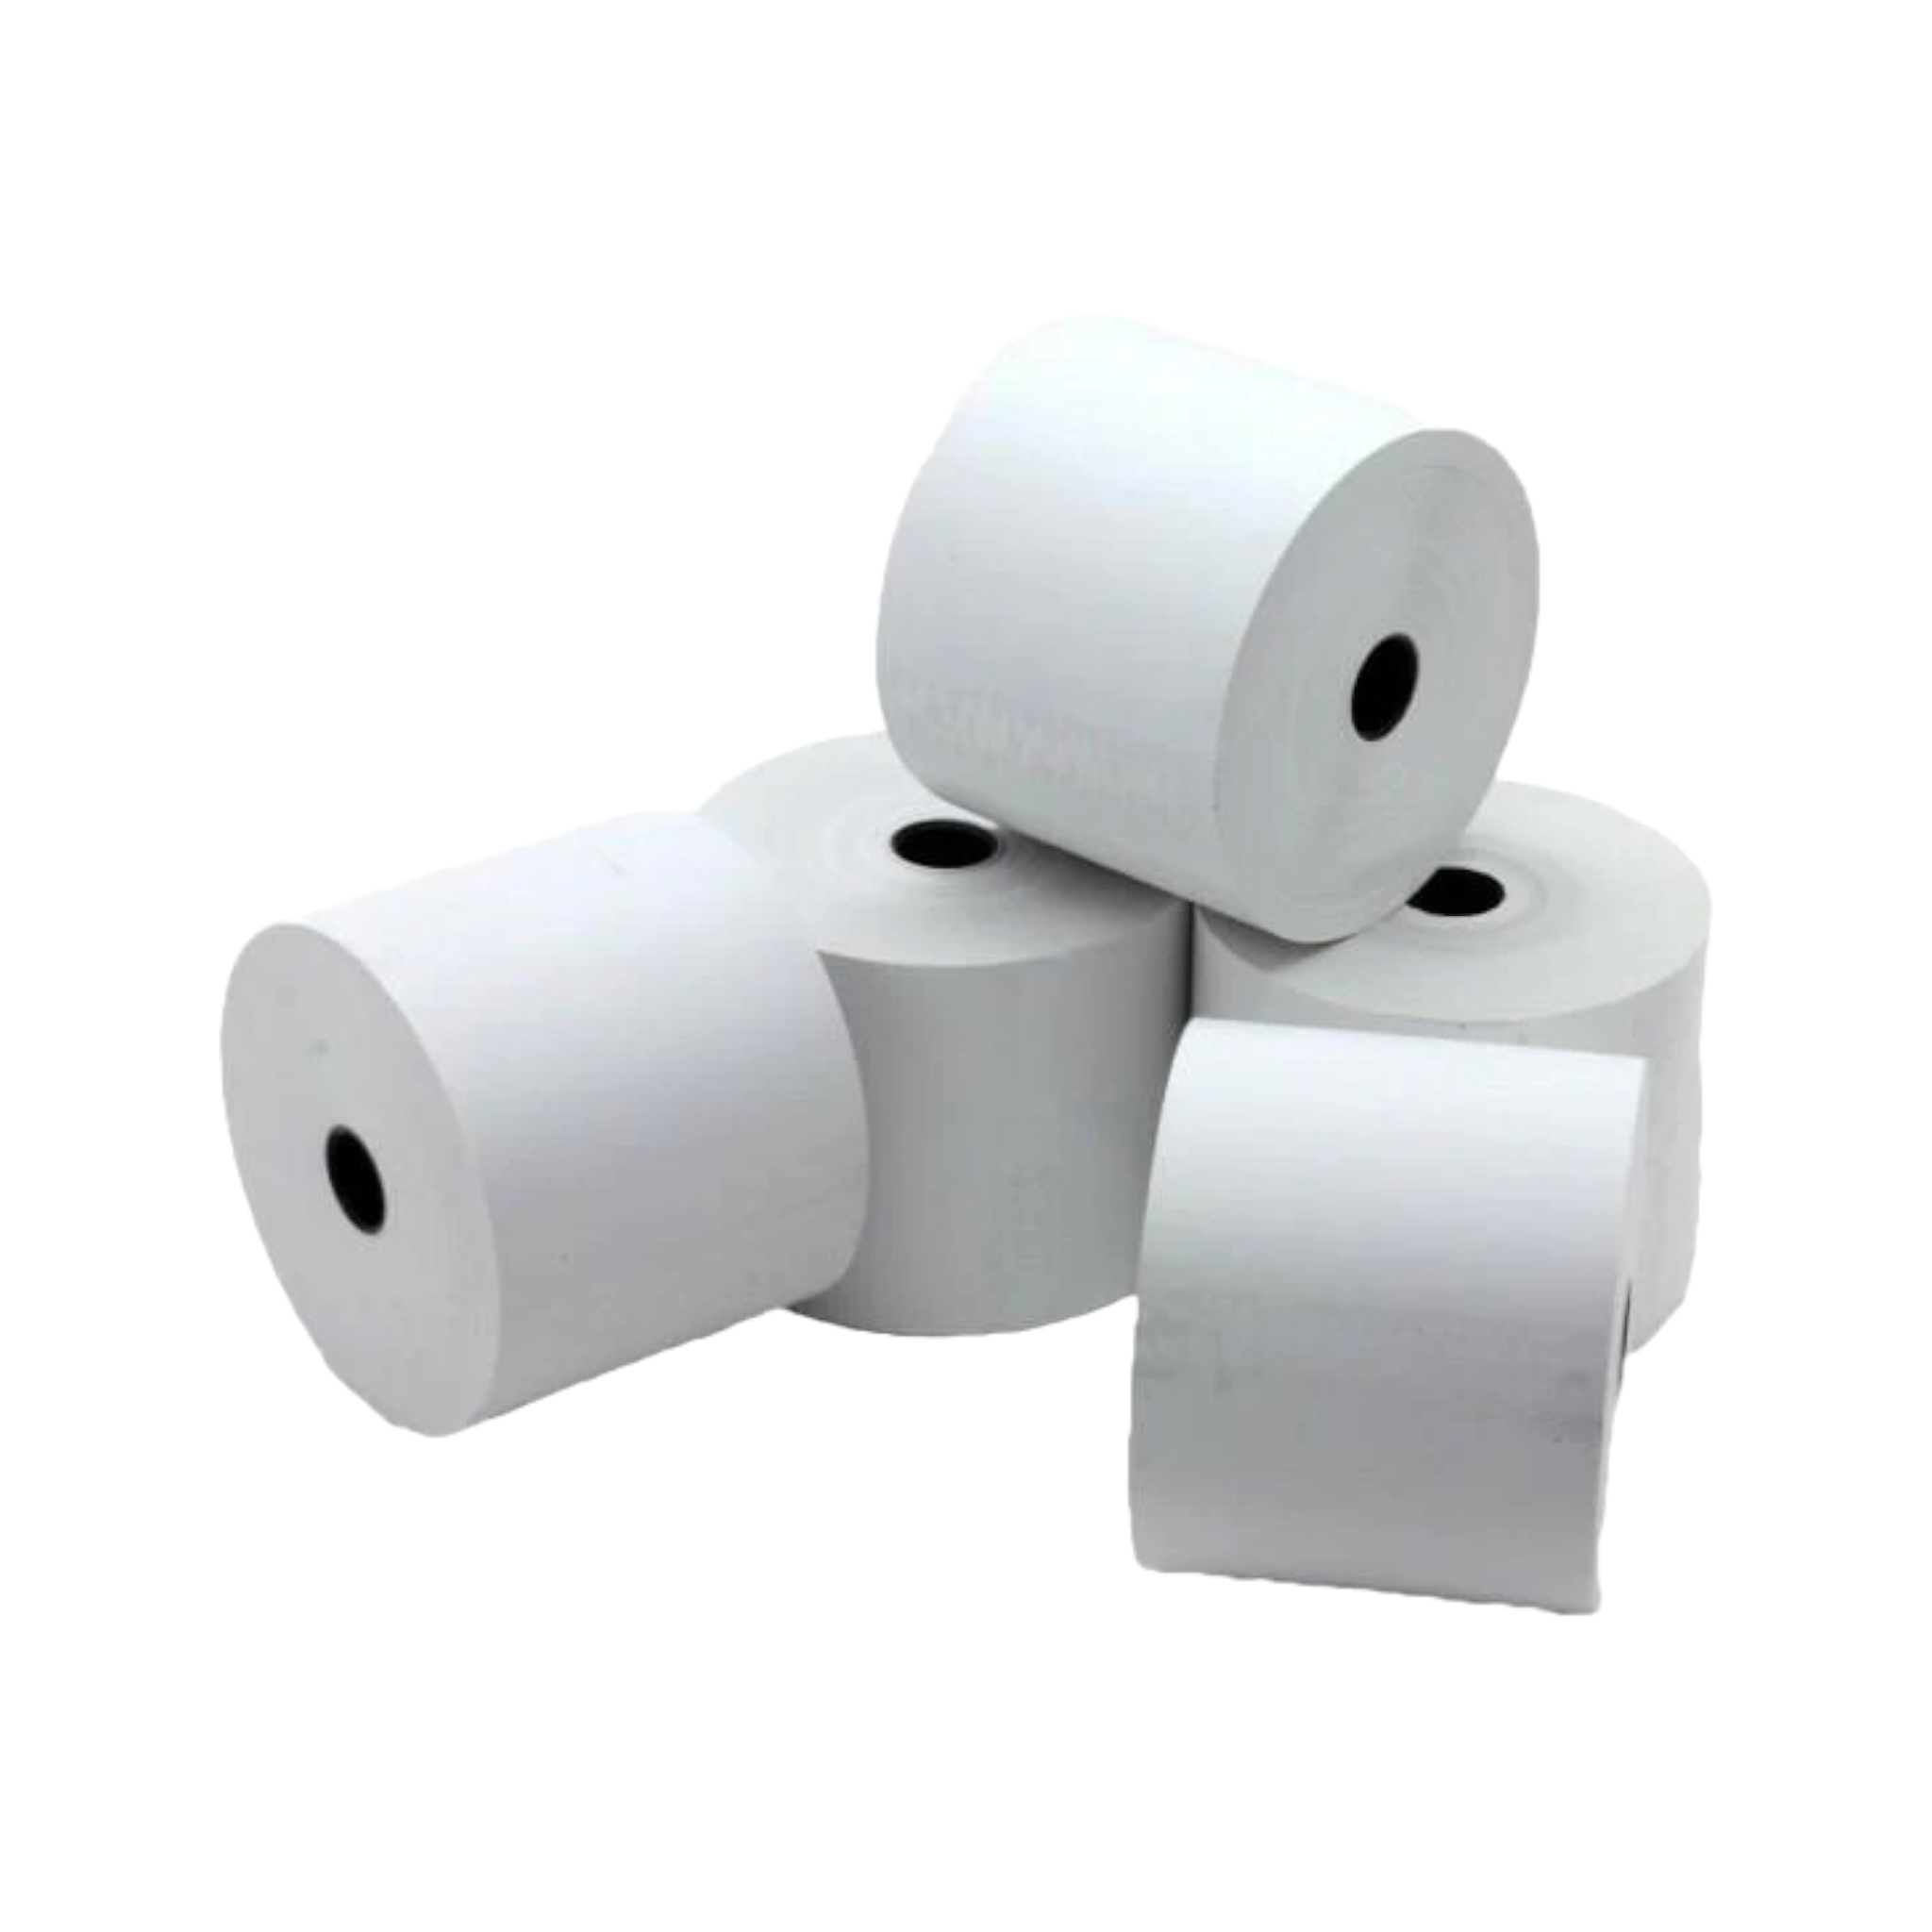 Thermal Point of Sale 80x83mm Till Paper Rolls 2pack